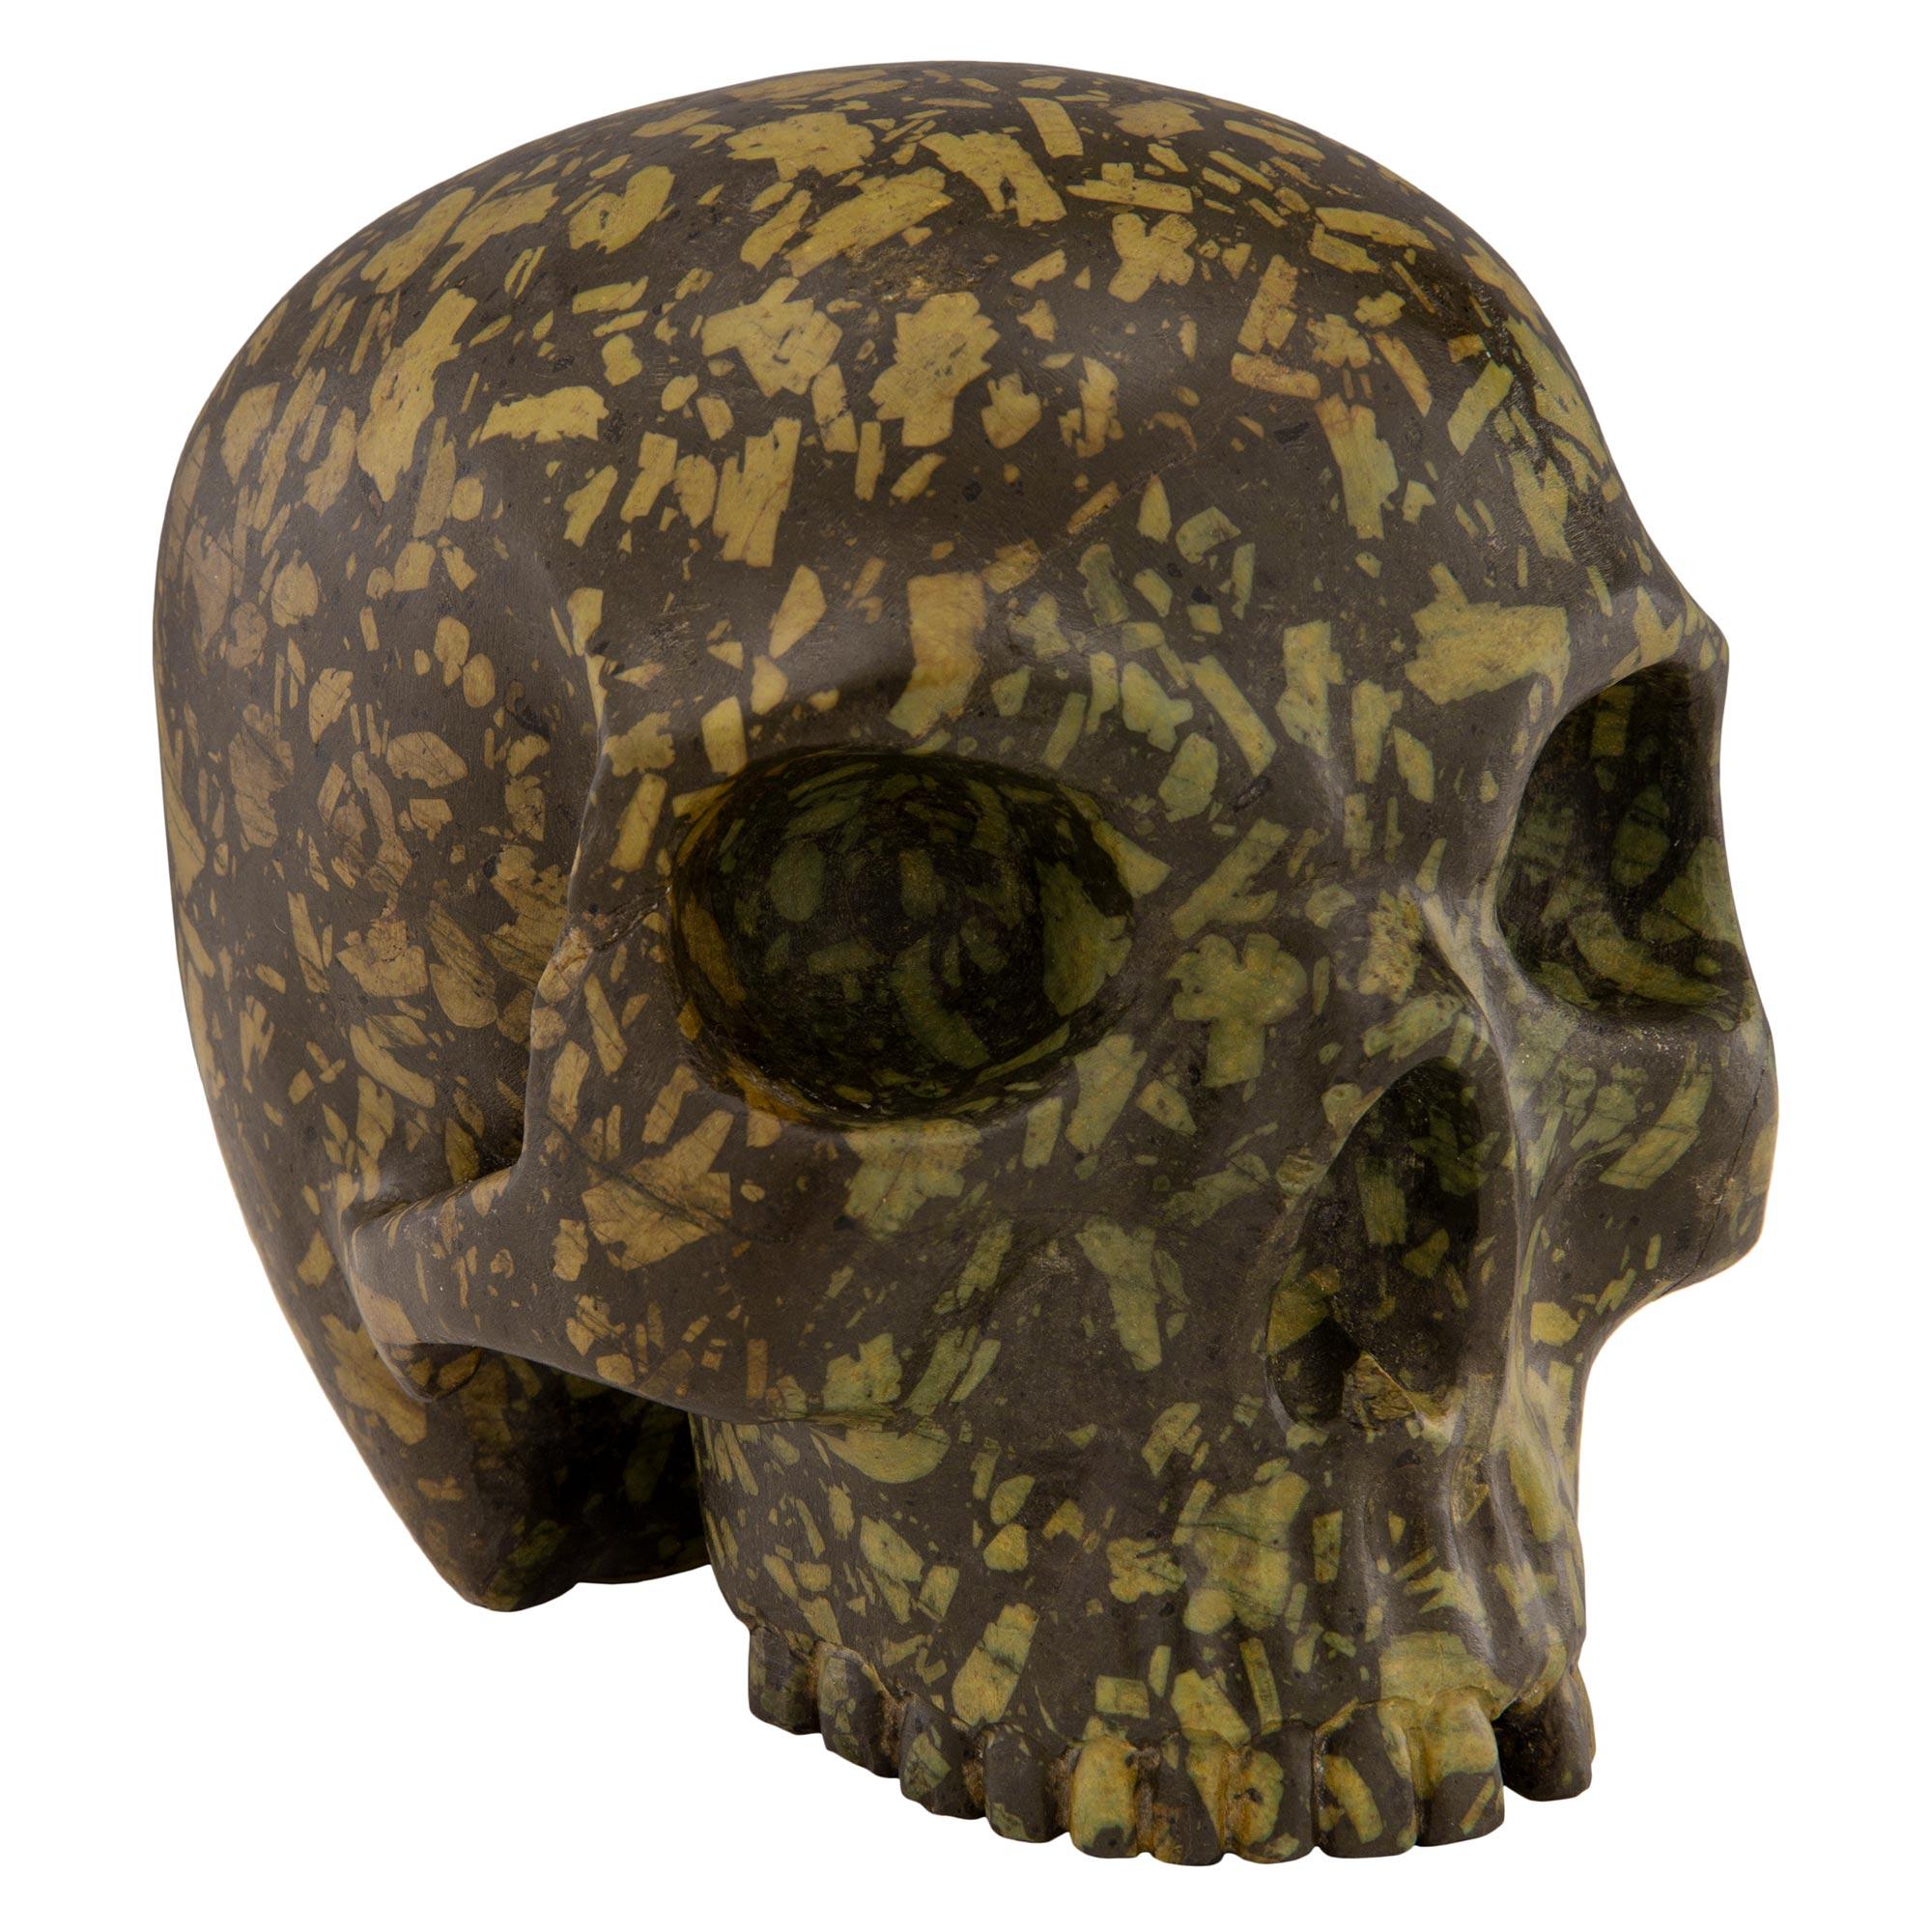 A rare and impressive Italian 19th century green Porphyry skull statue/paperweight. The bold skull displays finely sculpted details which emphasize the exceptional Porphyry marble.

  